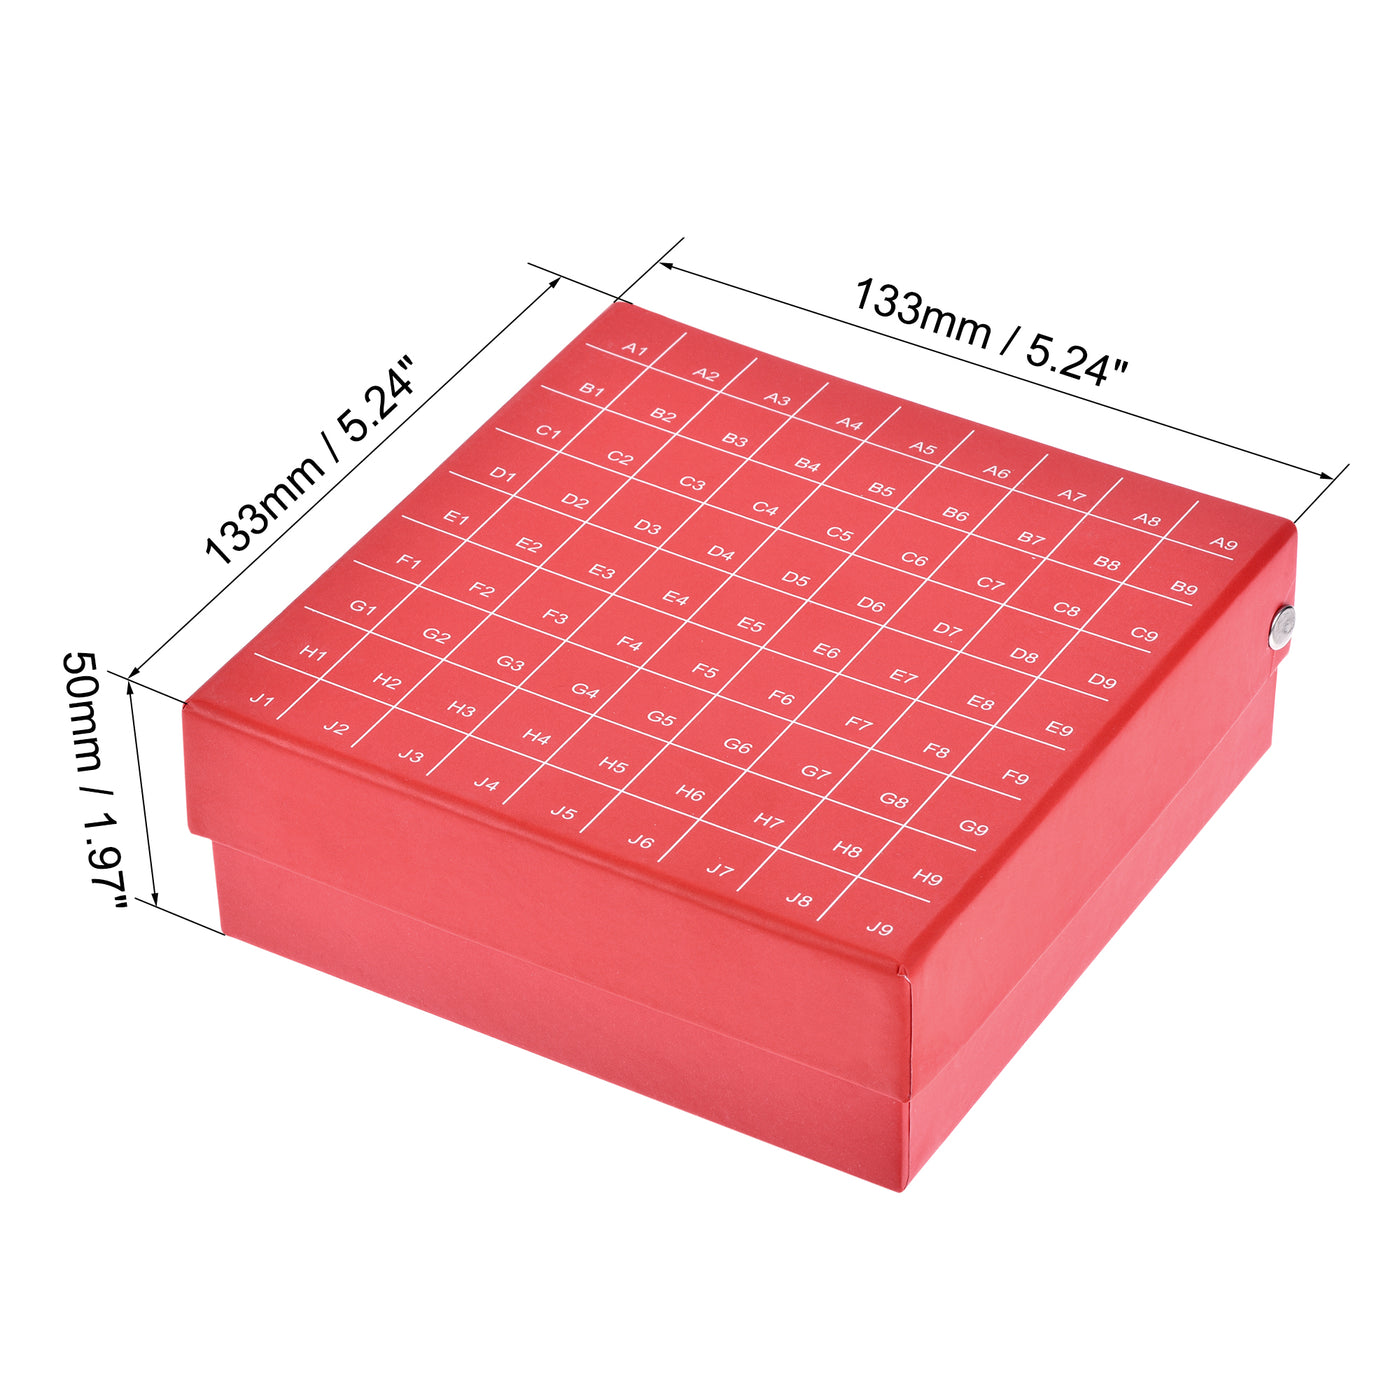 uxcell Uxcell Centrifuge Tube Holder 81-Well Waterproof Cardboard Red for 1.8ml/2ml Tubes